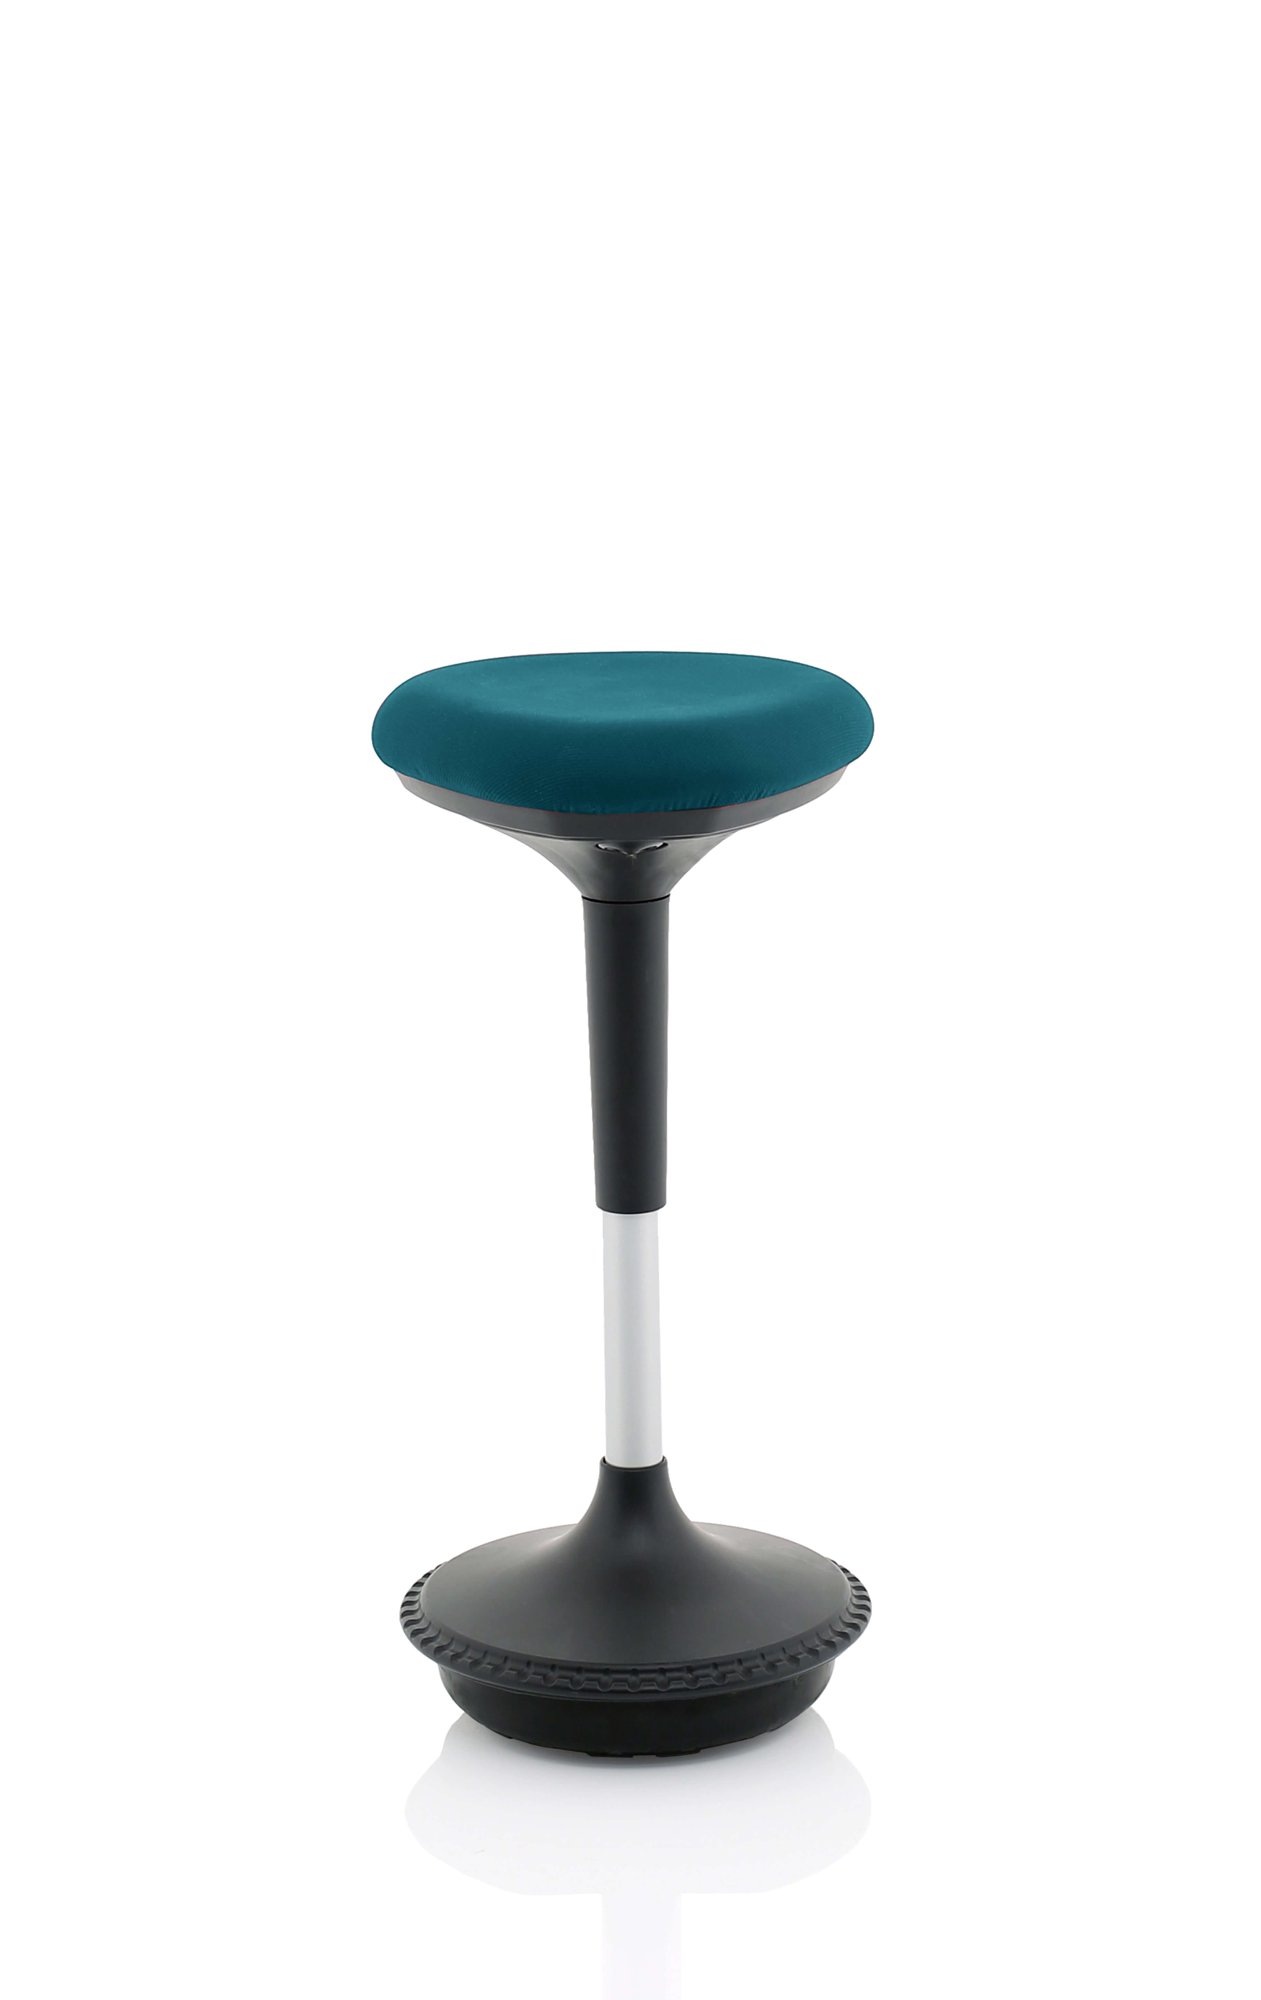 Step Stools Sitall Deluxe Visitor Stool Bespoke Seat Maringa Teal KCUP1550